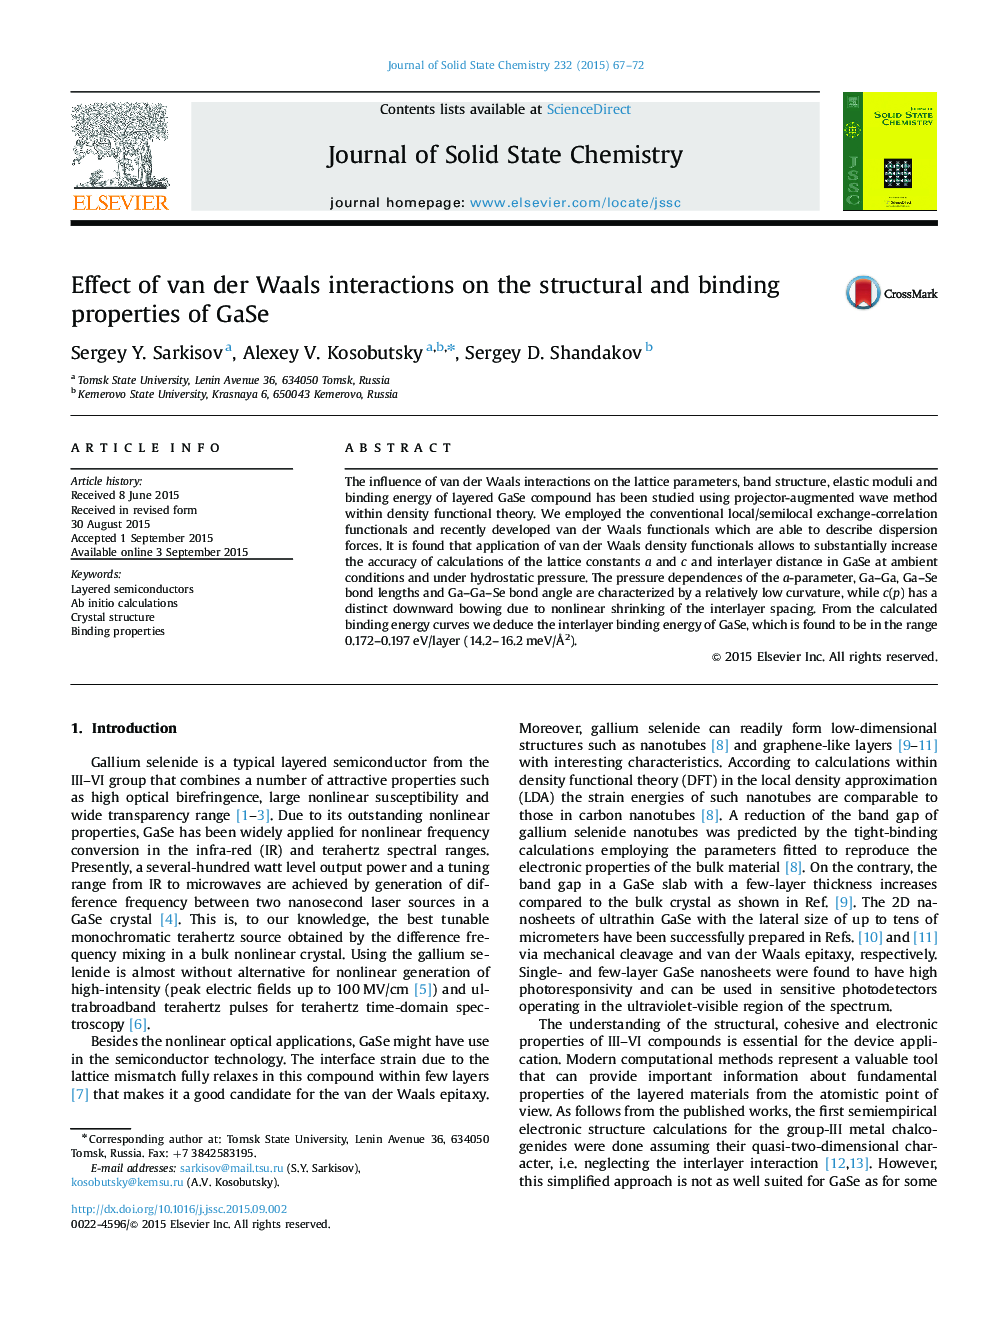 Effect of van der Waals interactions on the structural and binding properties of GaSe